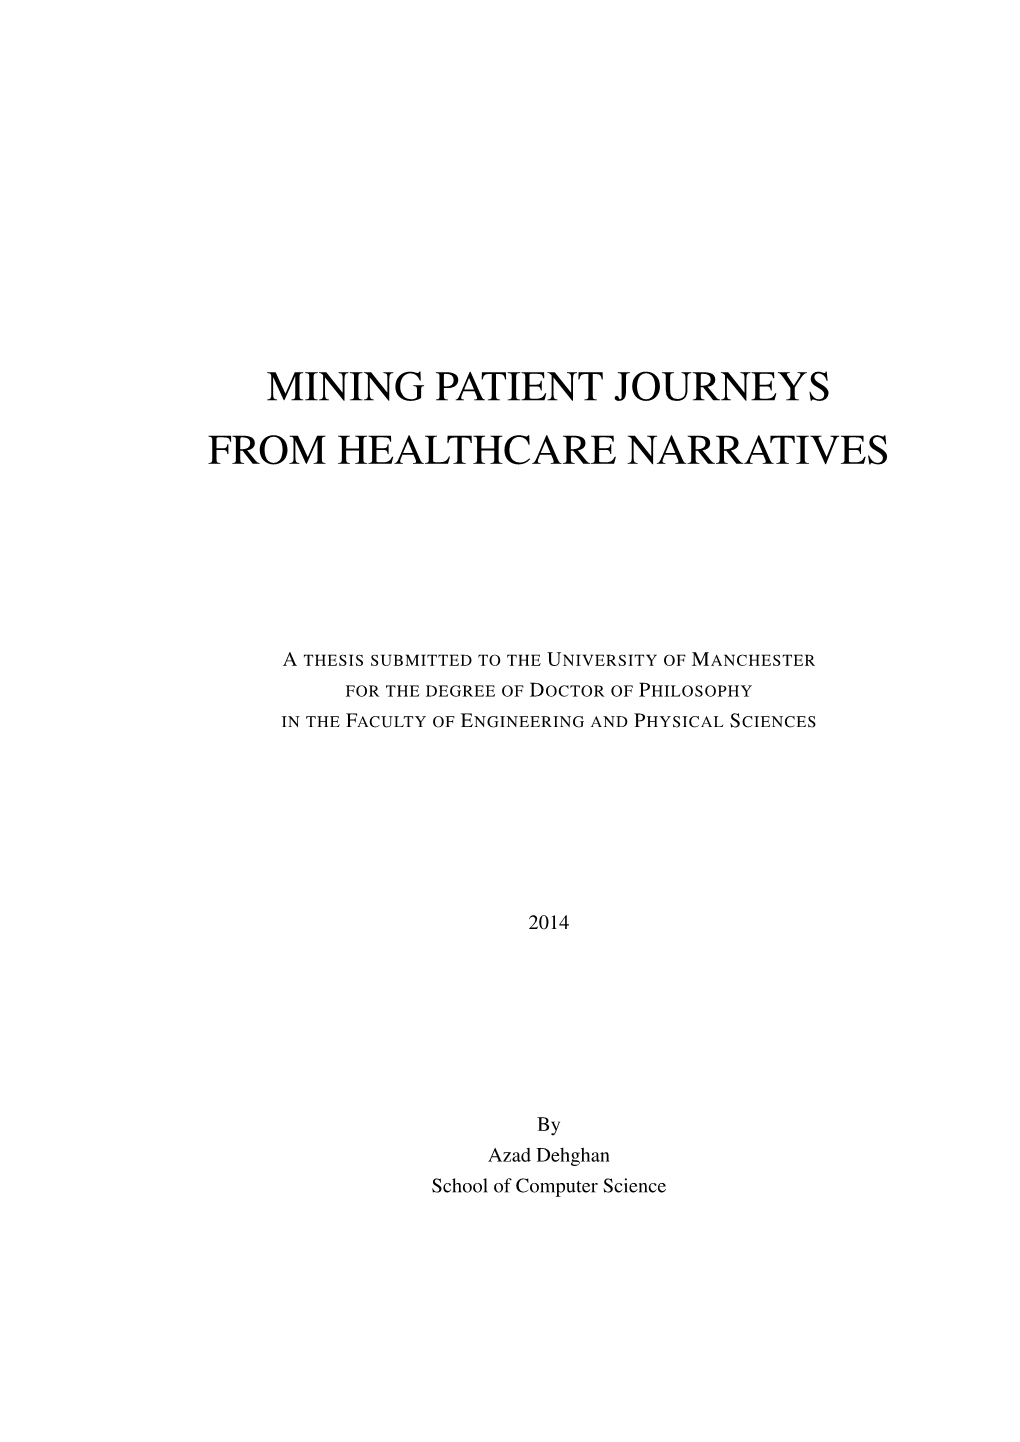 Mining Patient Journeys from Healthcare Narratives